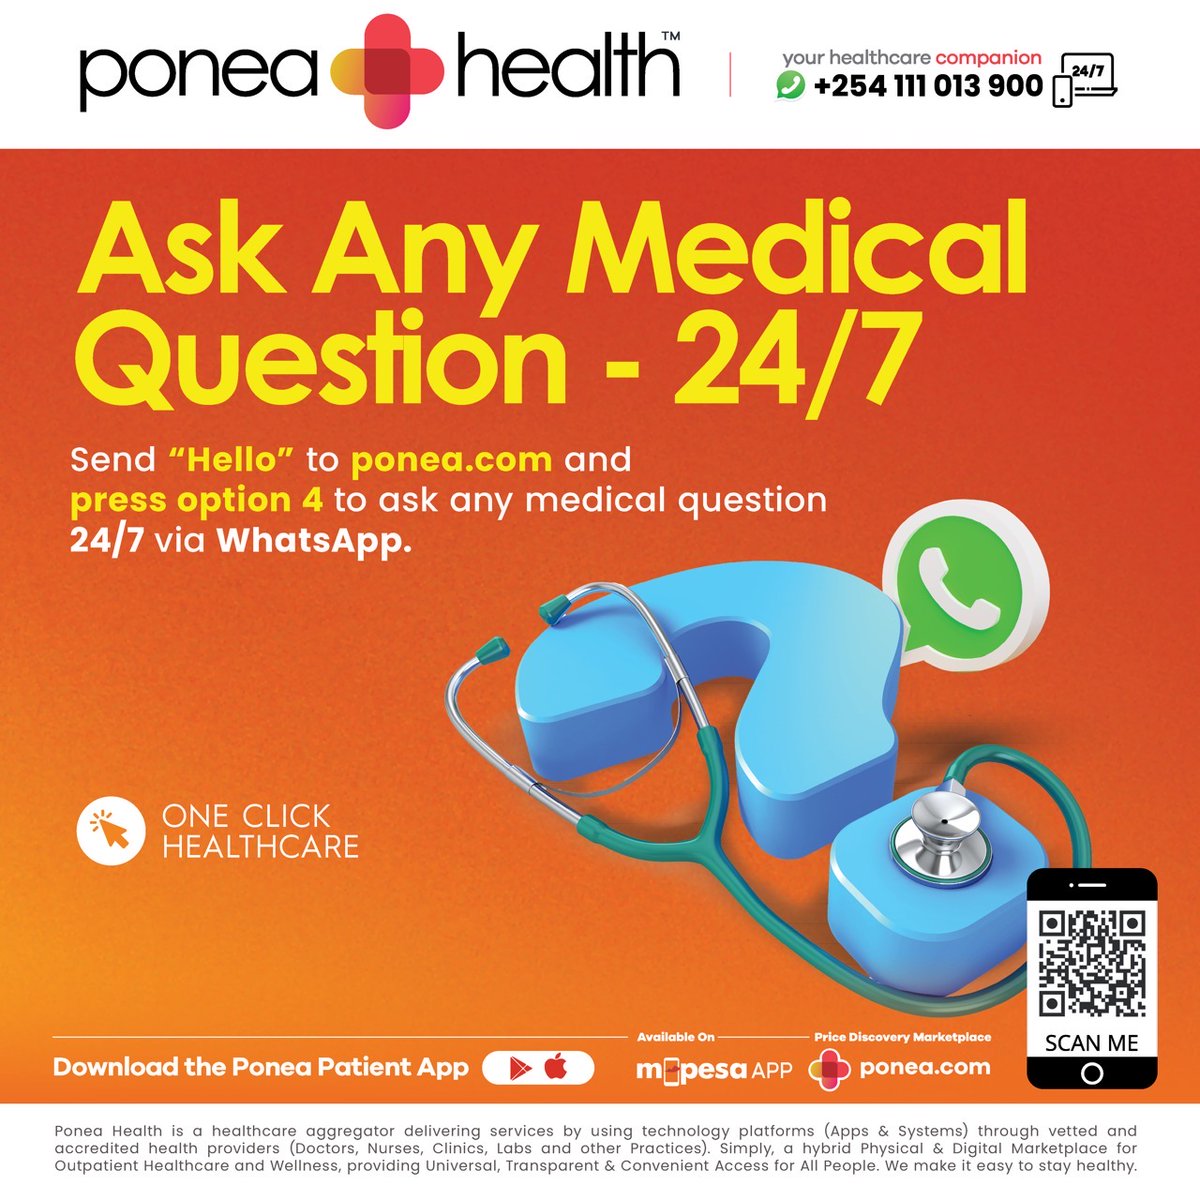 Our Smart AI is now available to answer any medical-related questions in any language. Try it out and share.
Simply click the link: wa.me/254111013900 and type 'Hello' to get started. You can then either use the symptom checker or ask any medical question. 
 #SymptomChecker